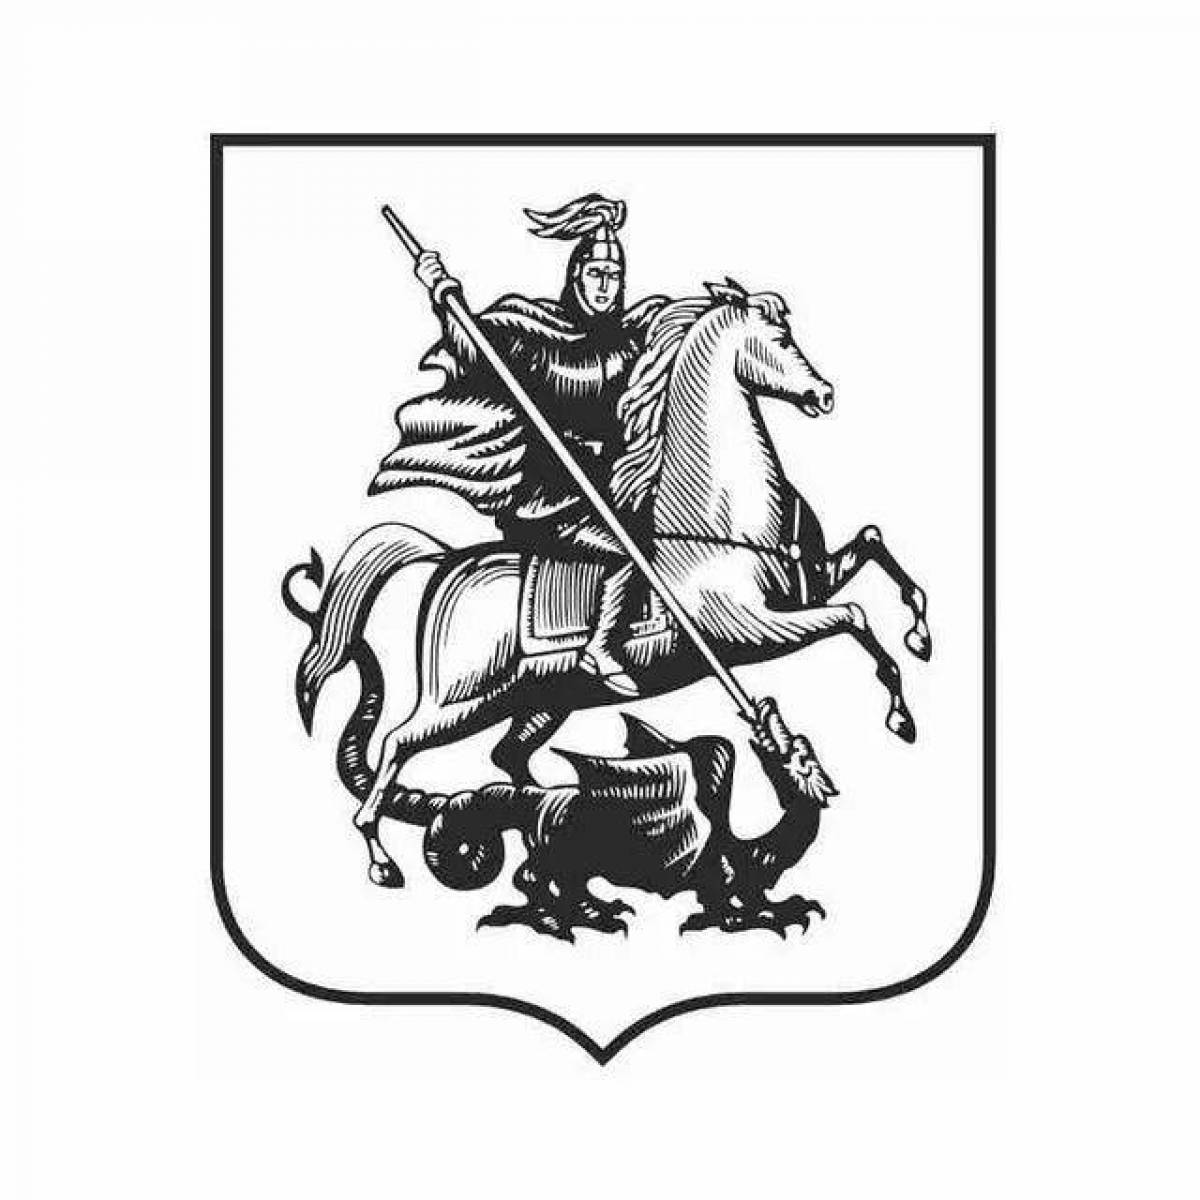 Coat of arms of moscow #14